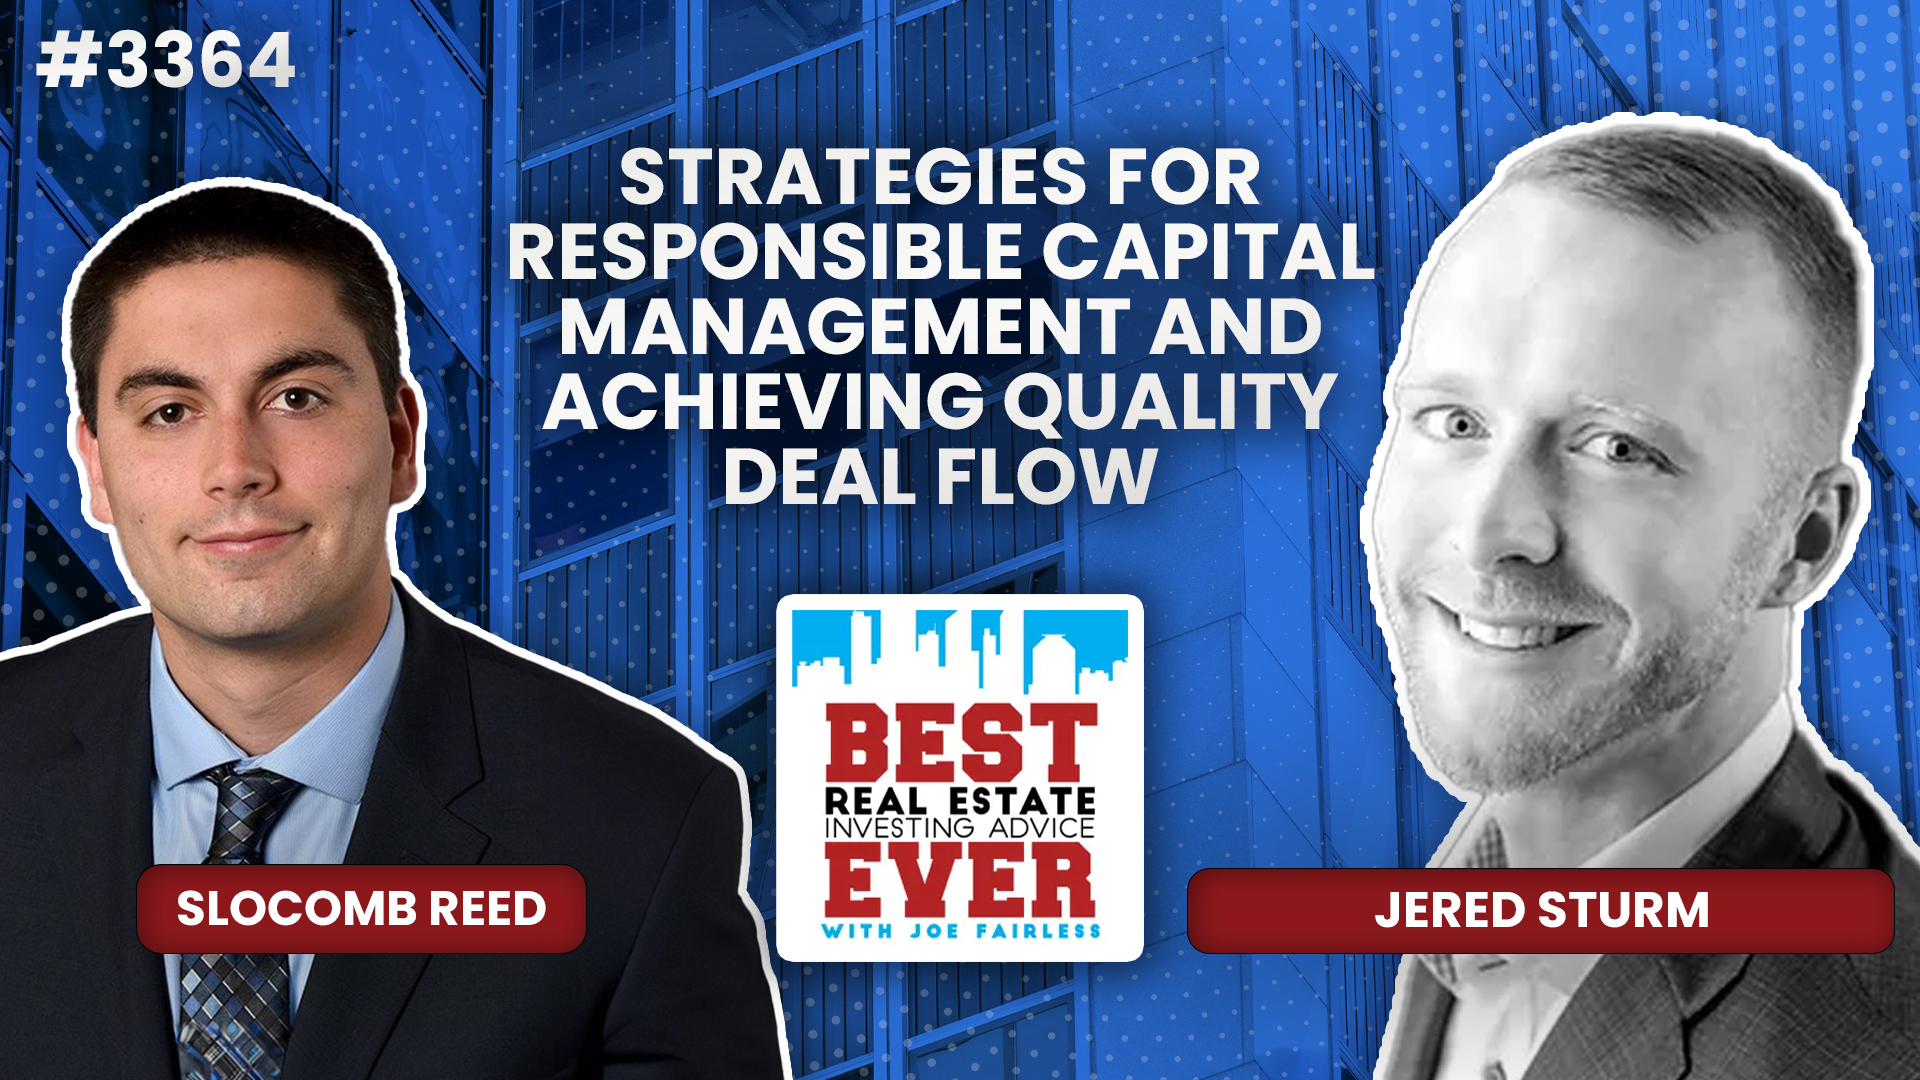 JF3364: Jered Sturm - Strategies for Responsible Capital Management and Achieving Quality Deal Flow